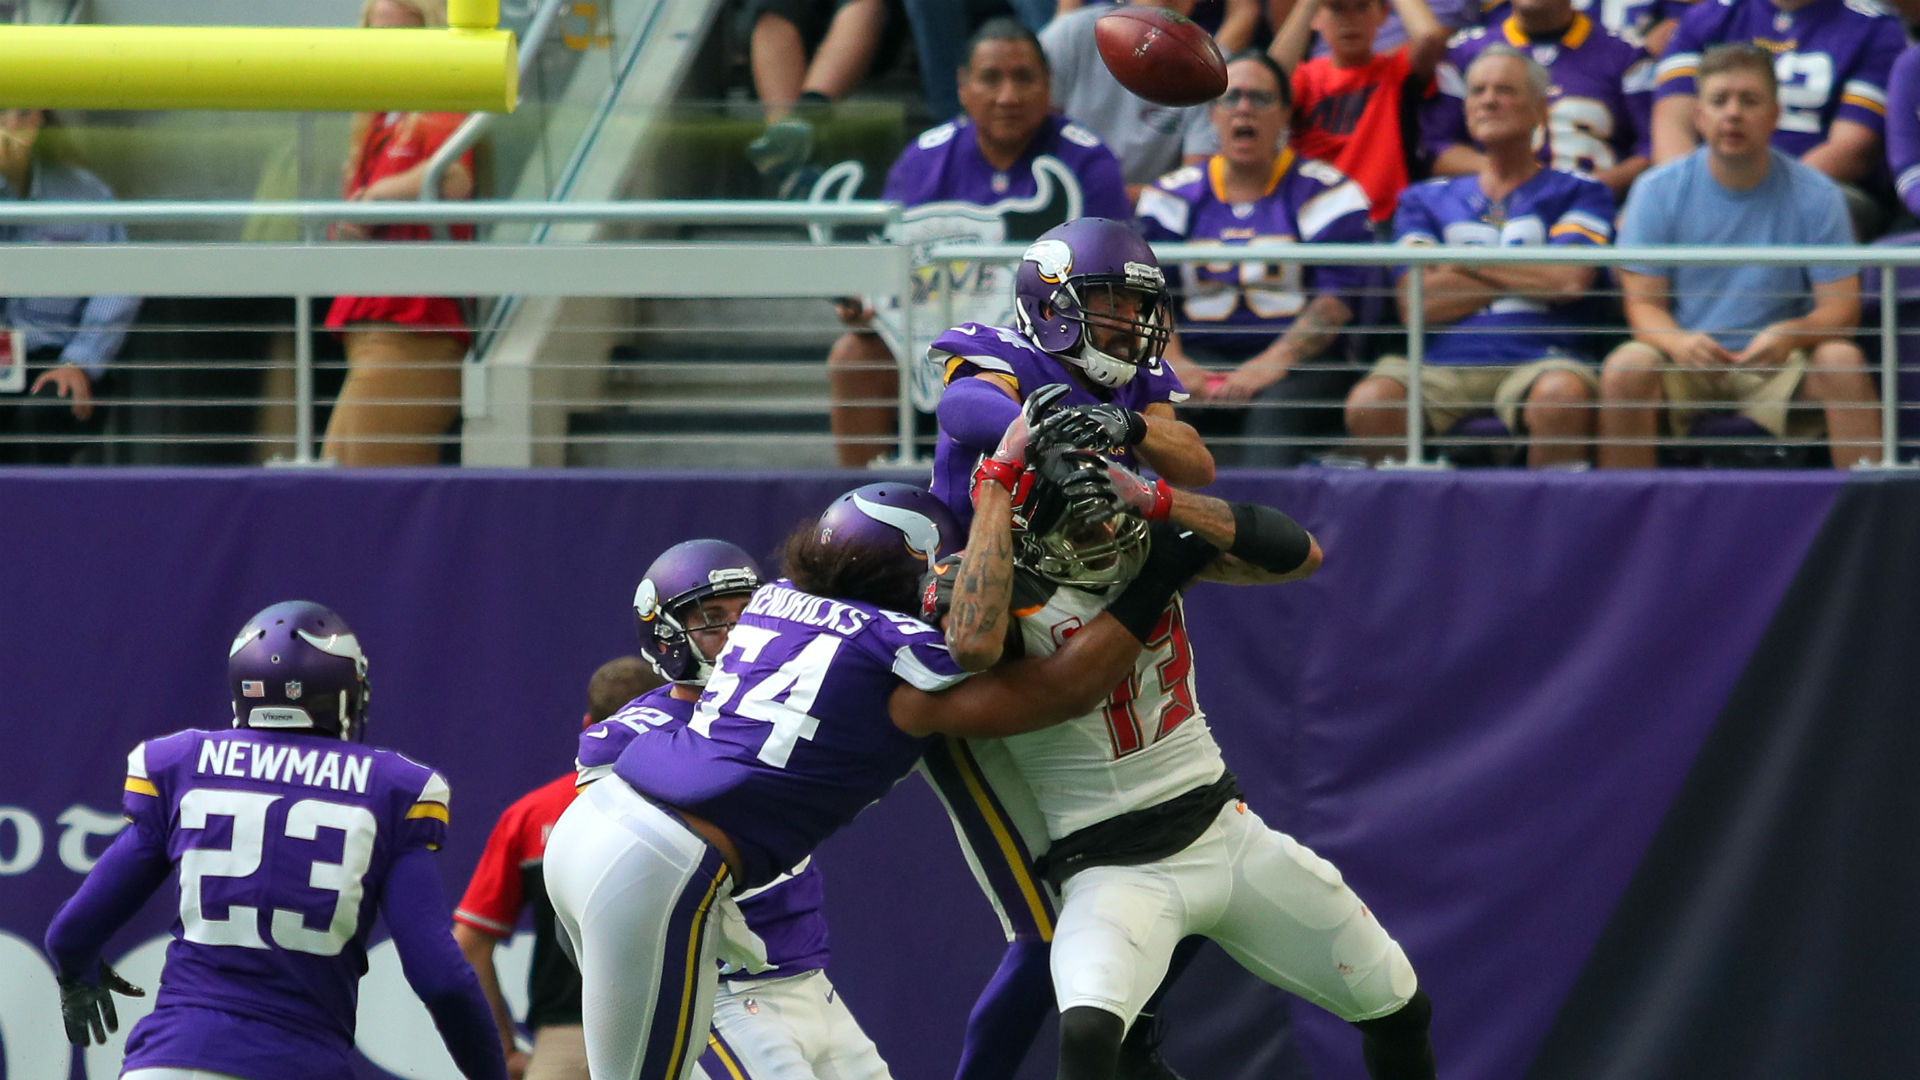 Vikings defense smothers Bucs, compliments play of 'baller' Case Keenum